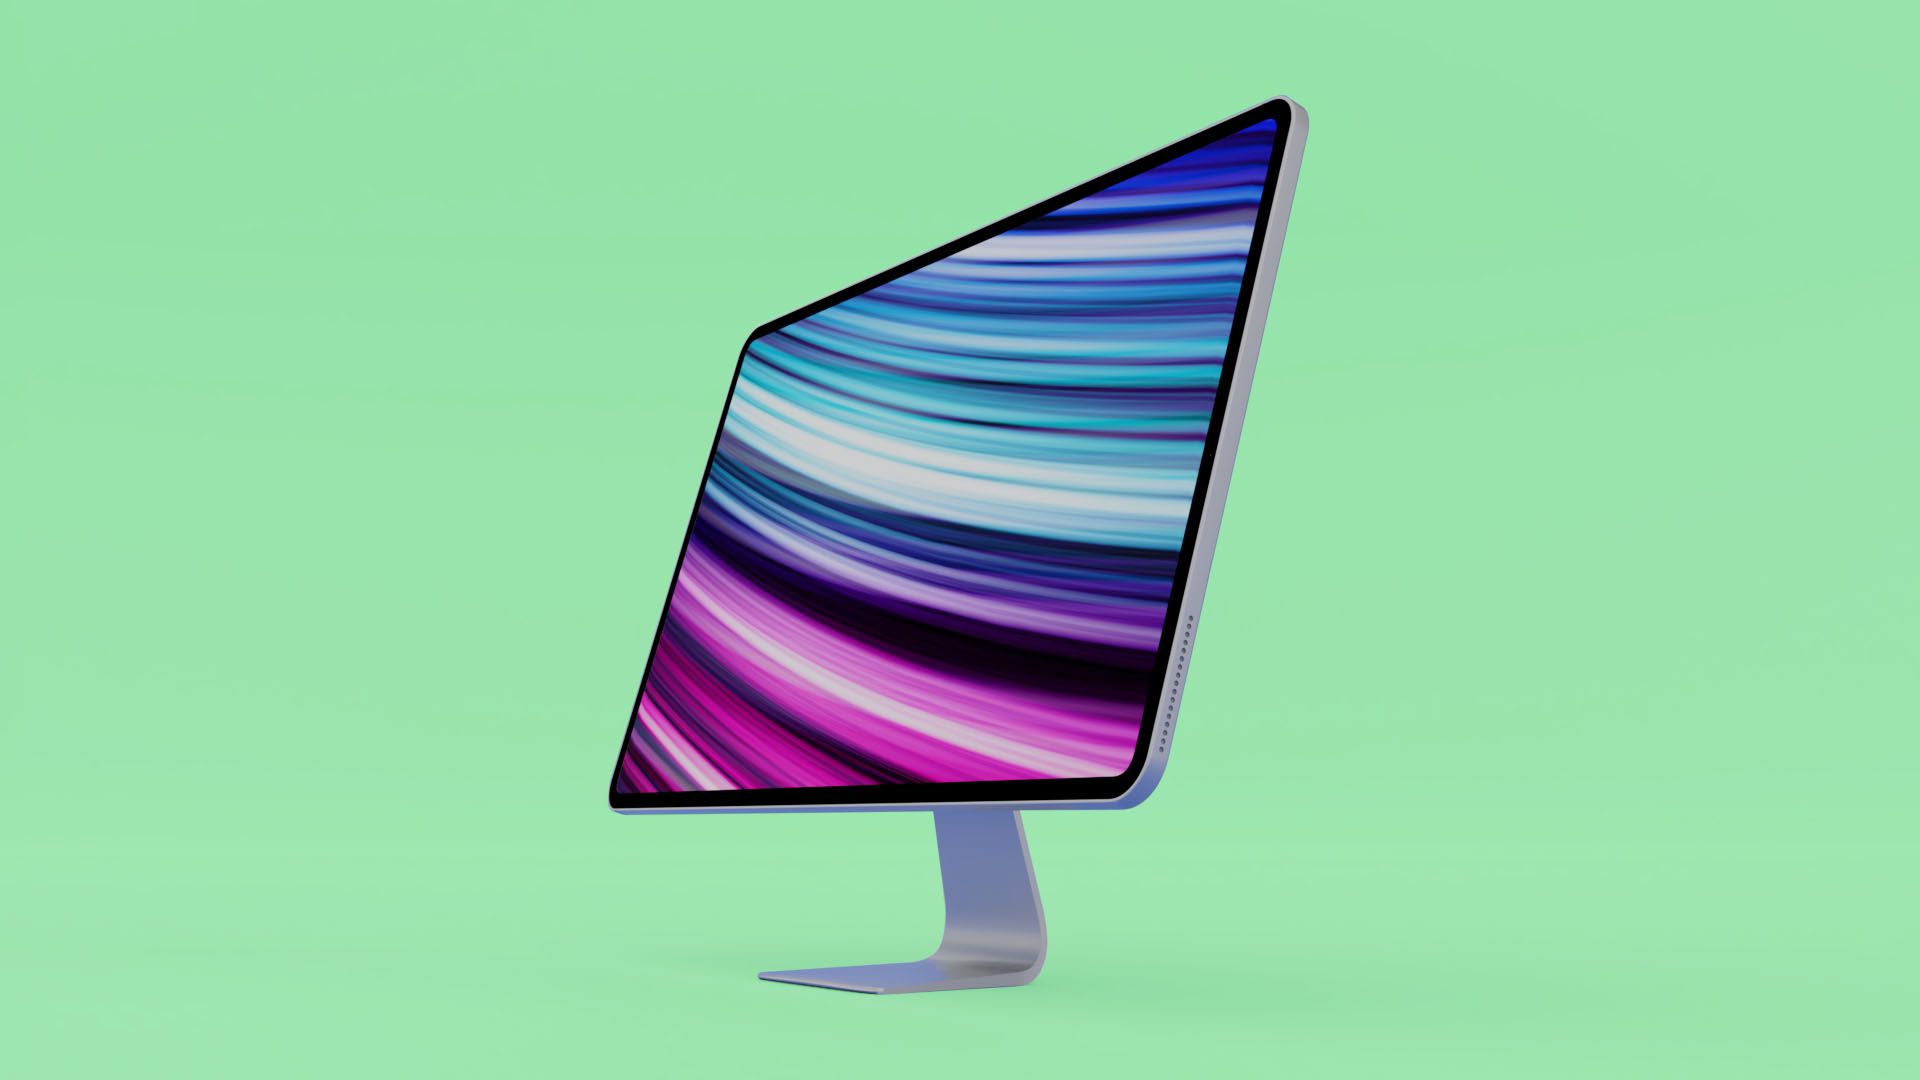 Apple's 2022 iMac Pro: Everything We Know